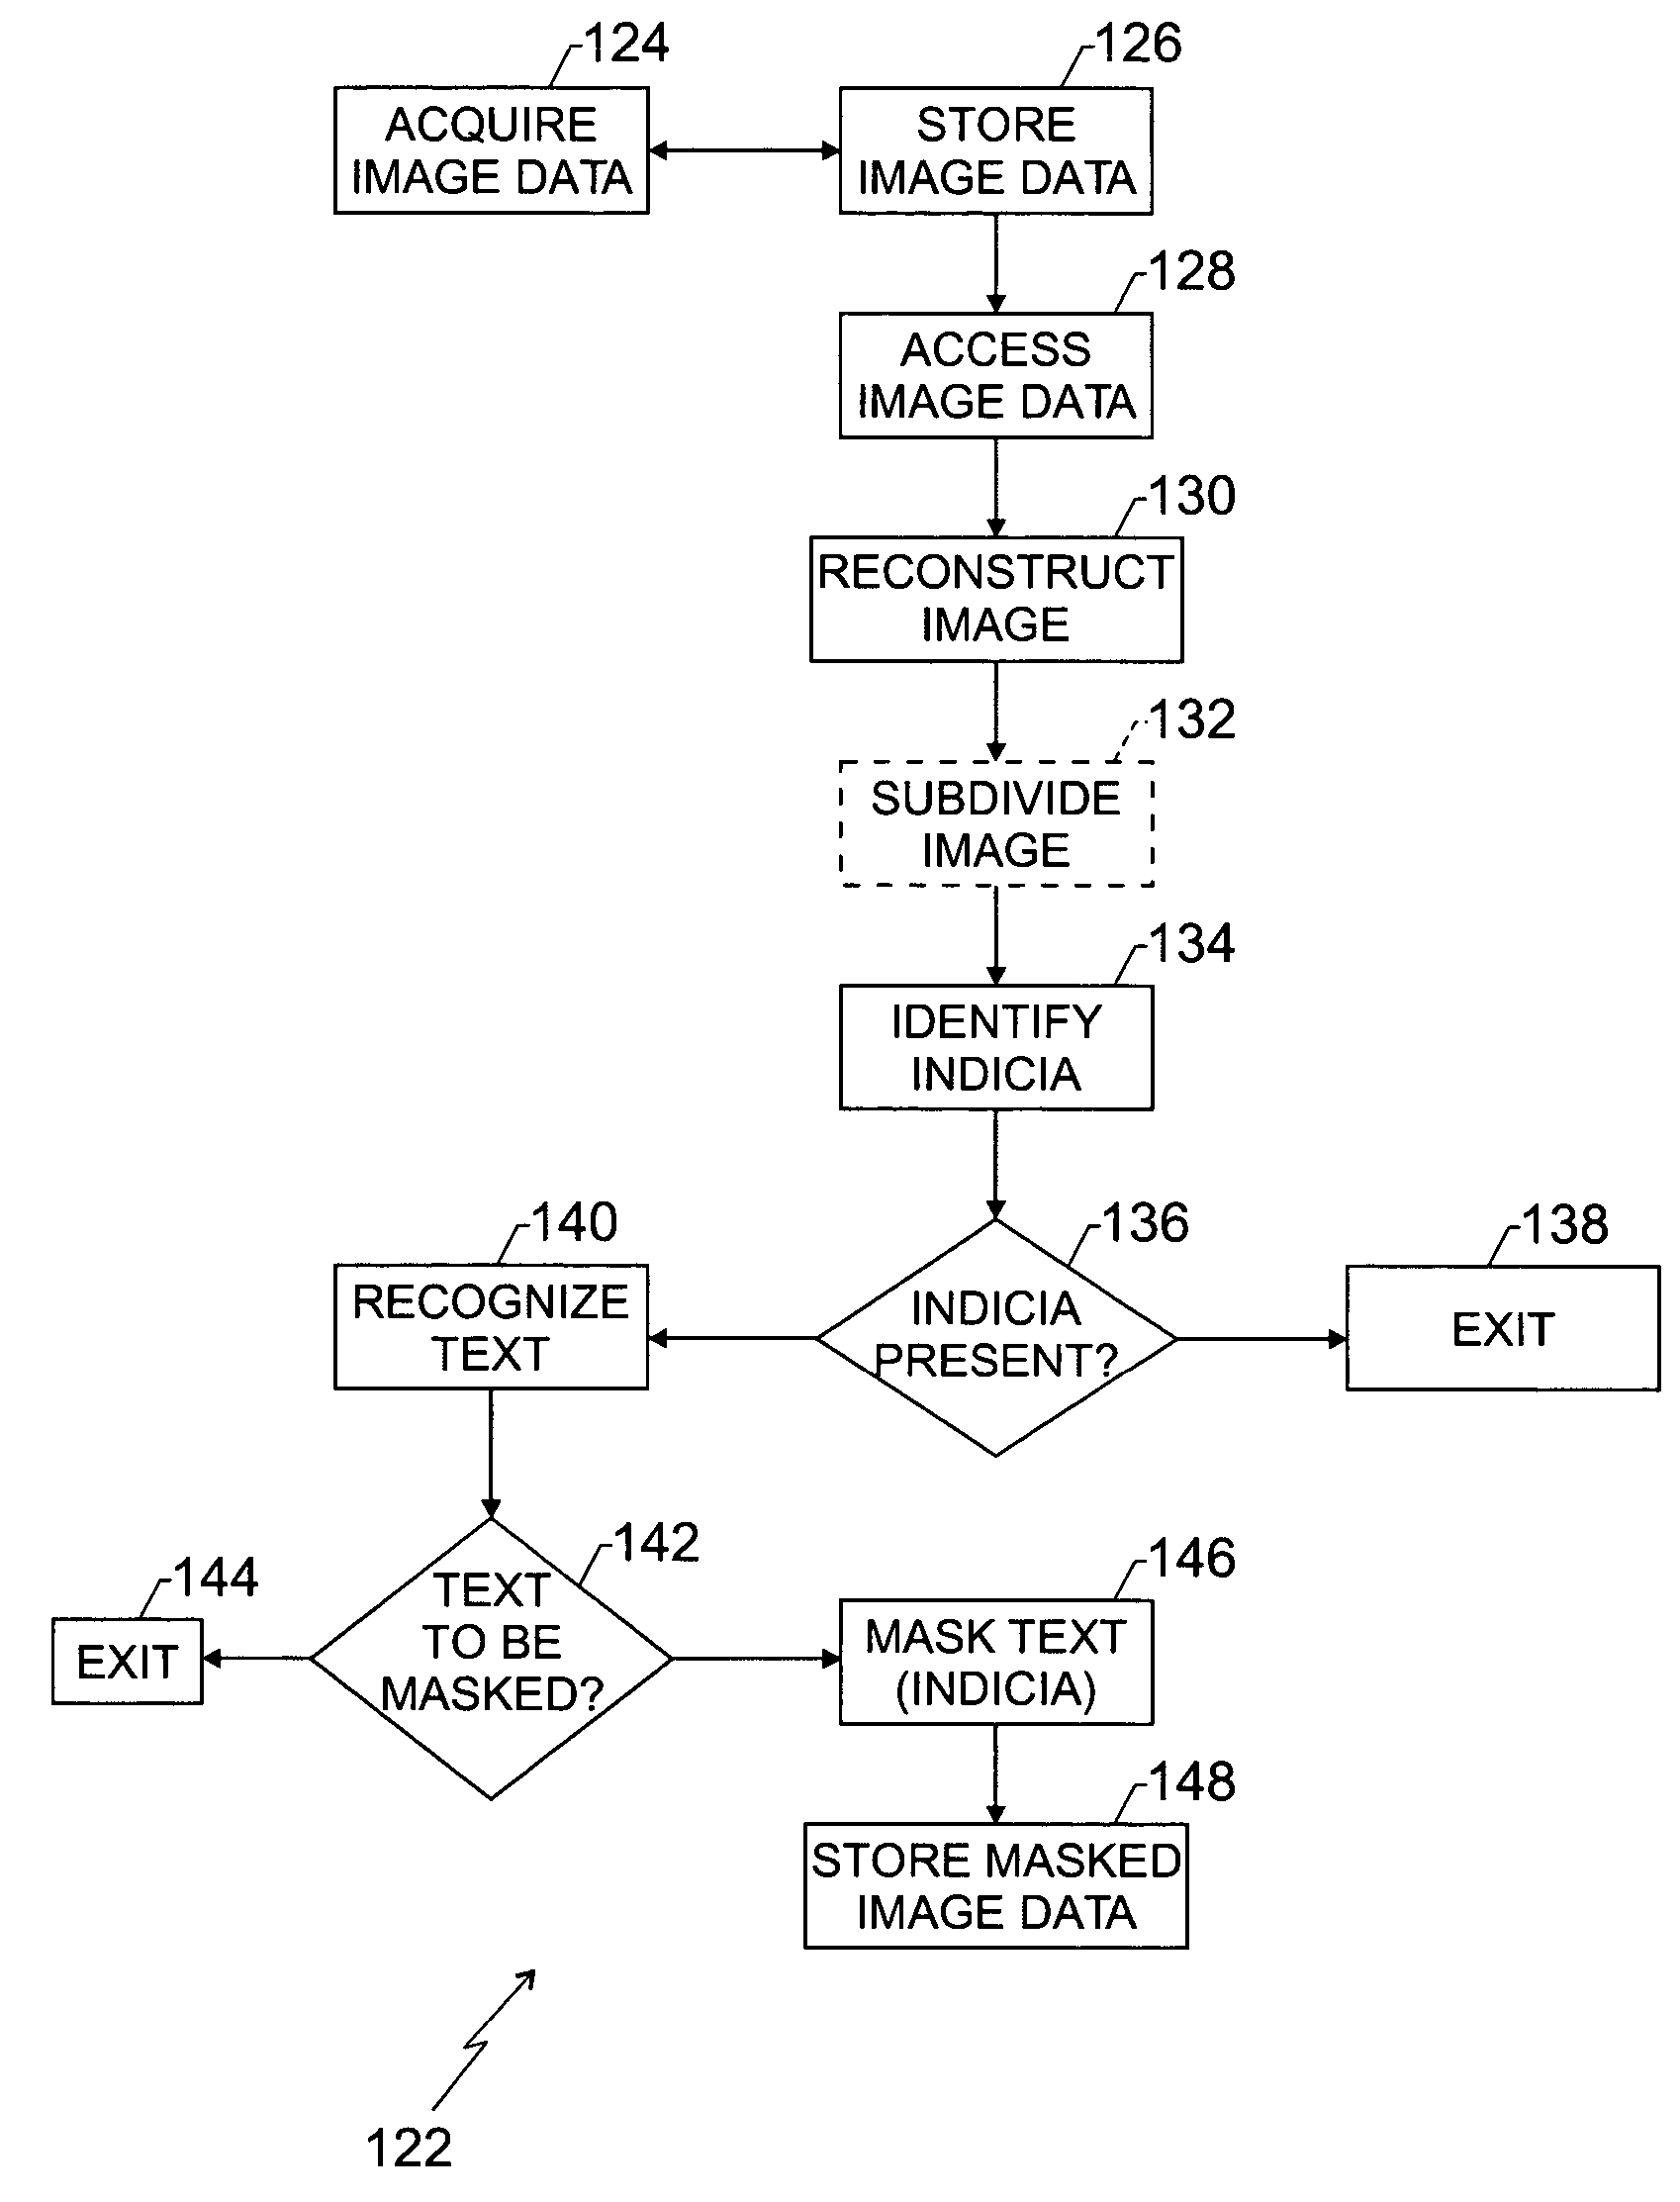 Image-based patient data obfuscation system and method